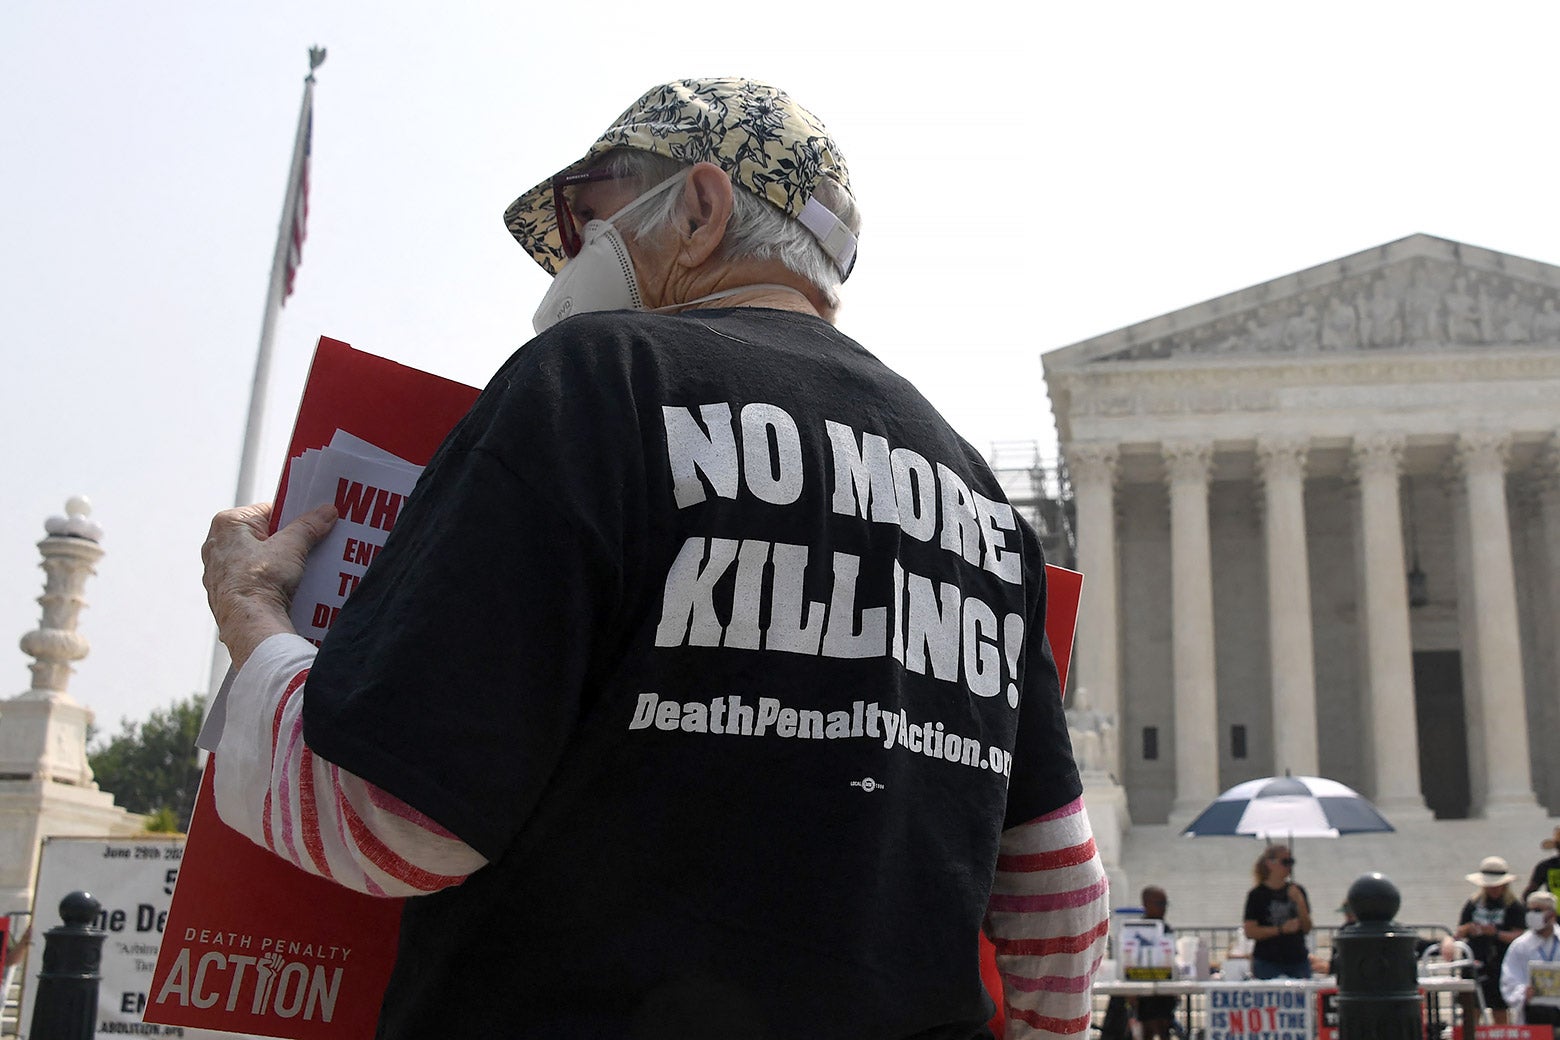 Connecticut may have figured out how to halt executions in Texas.